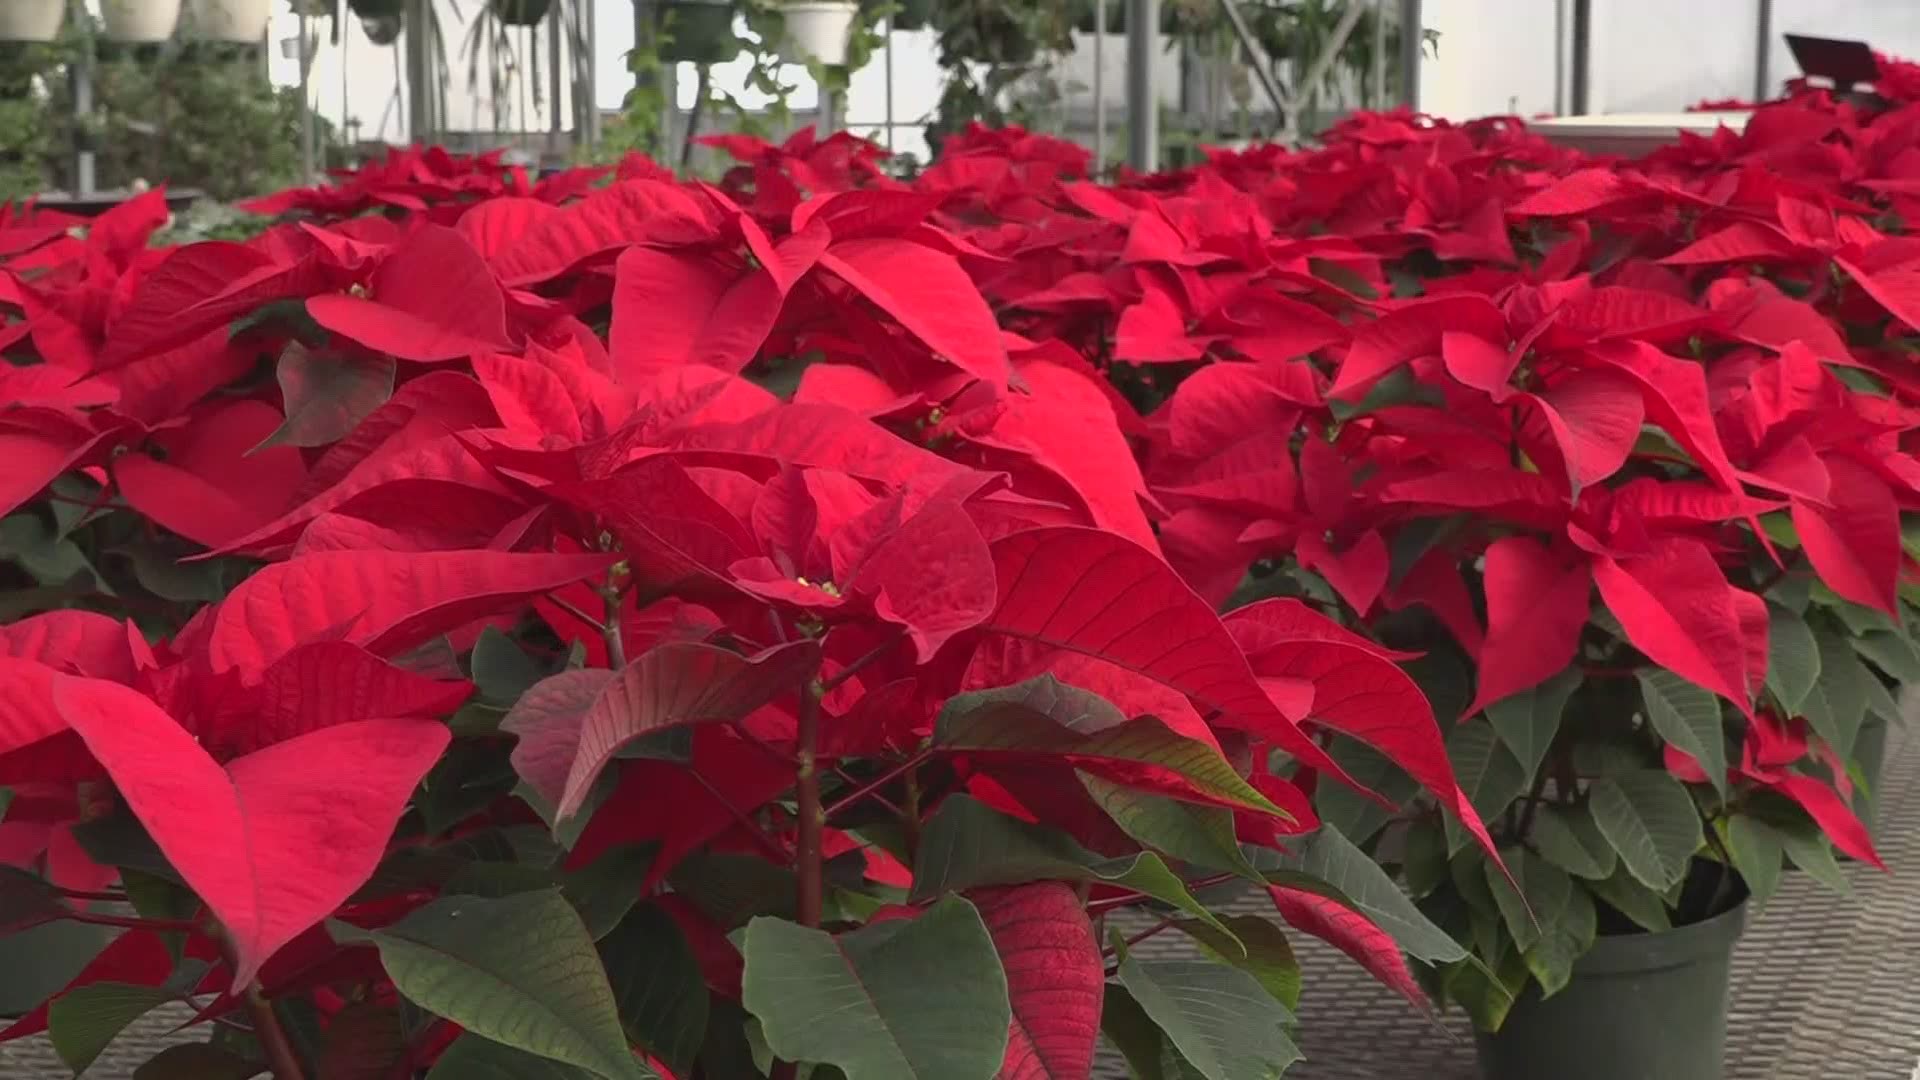 The red holiday flower is often sold as part of fundraisers. But as the pandemic continues, those fundraisers aren't happening.